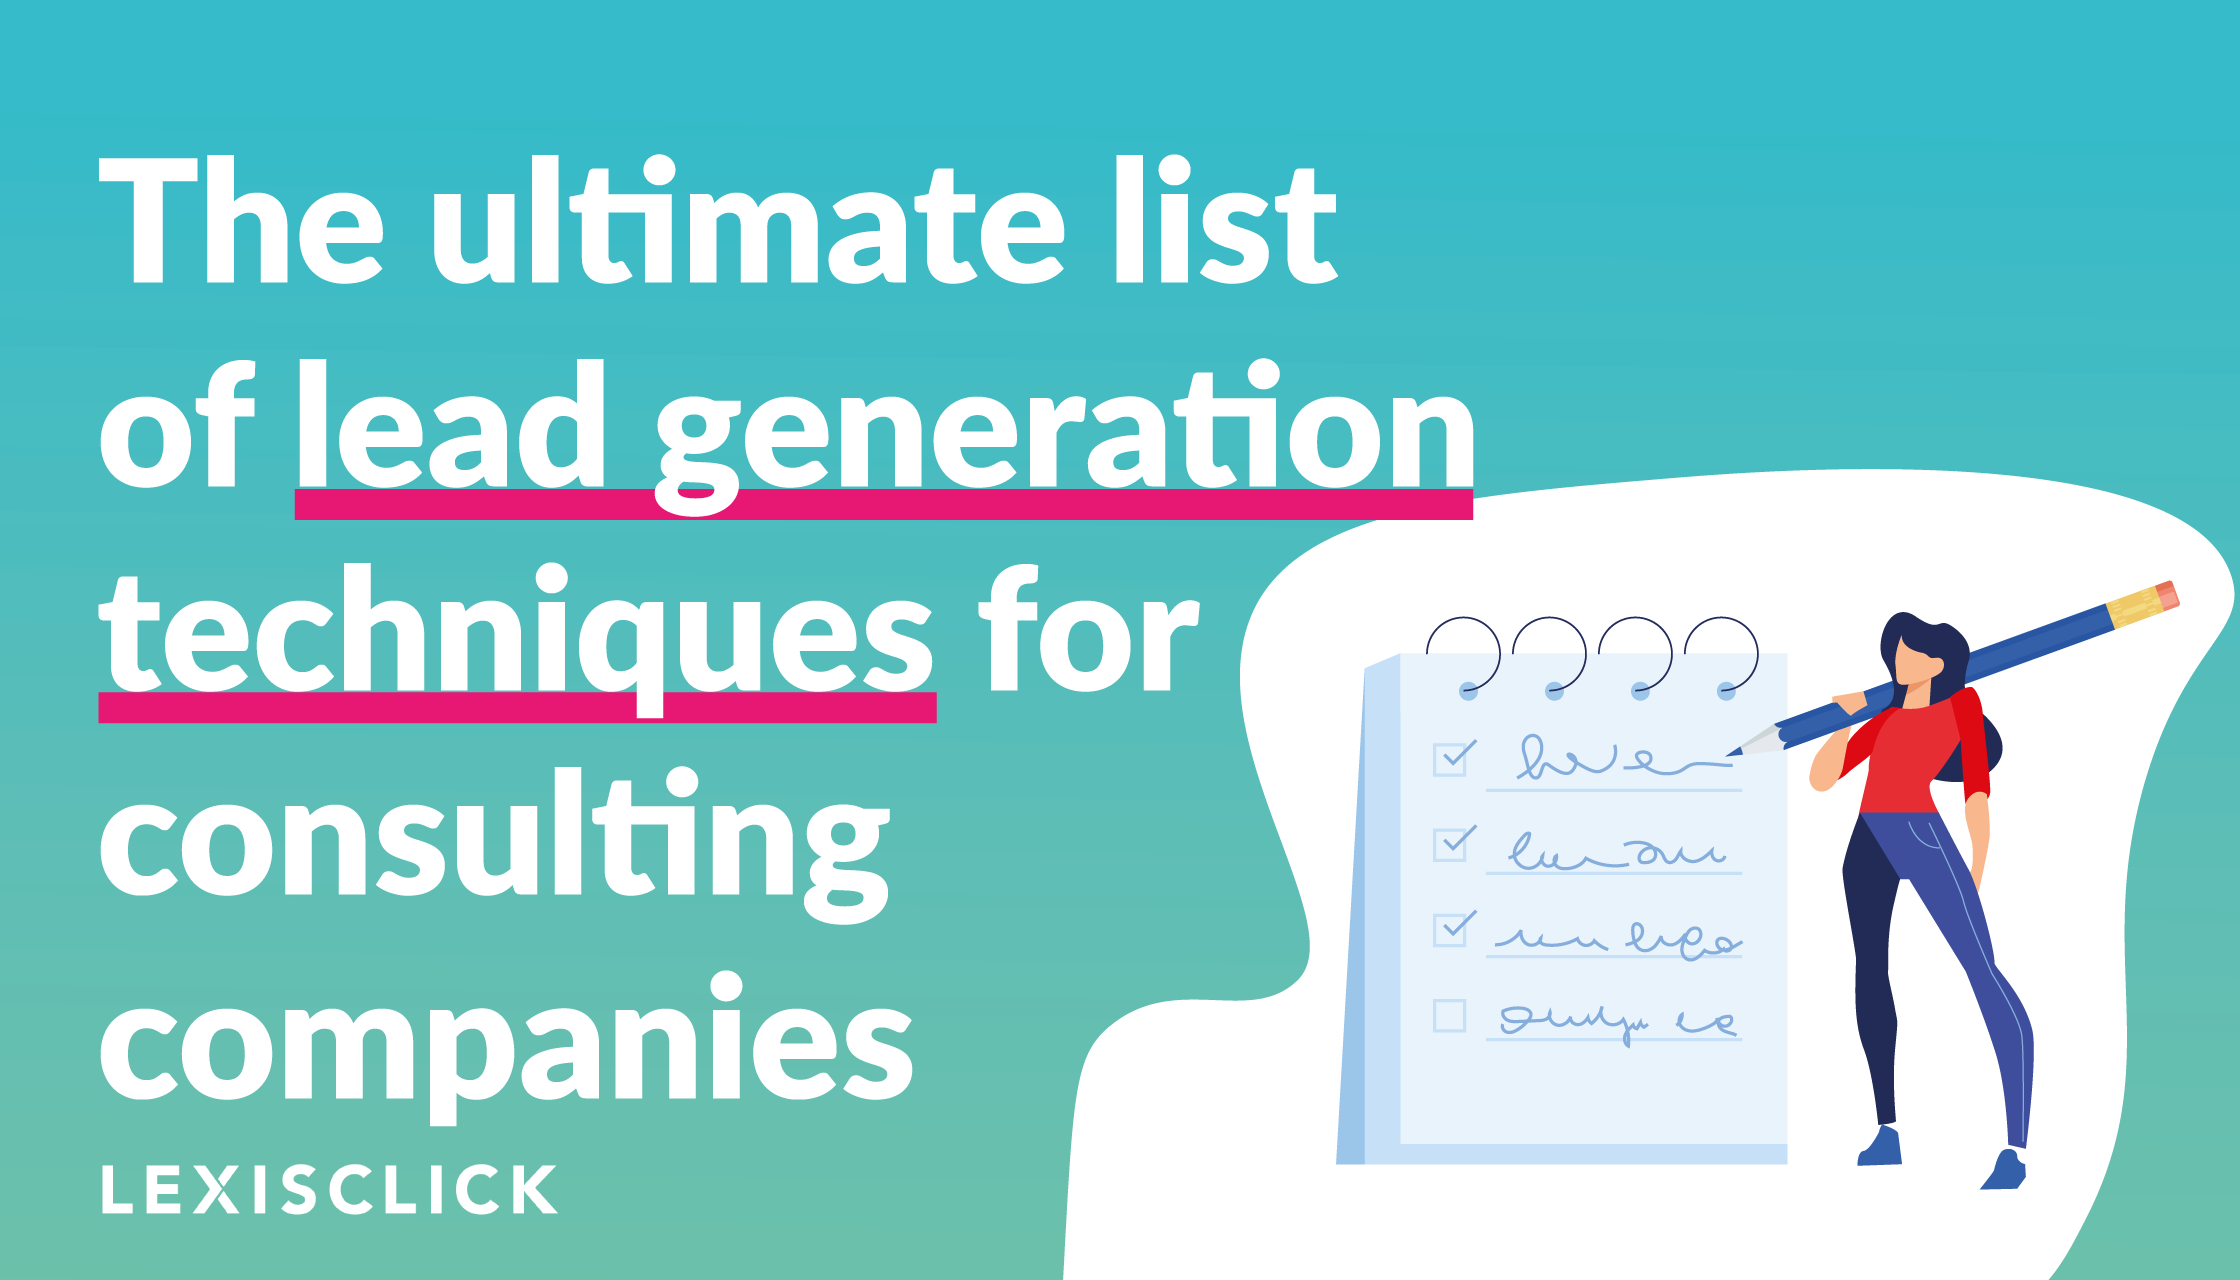 The list of lead generation for consulting companies